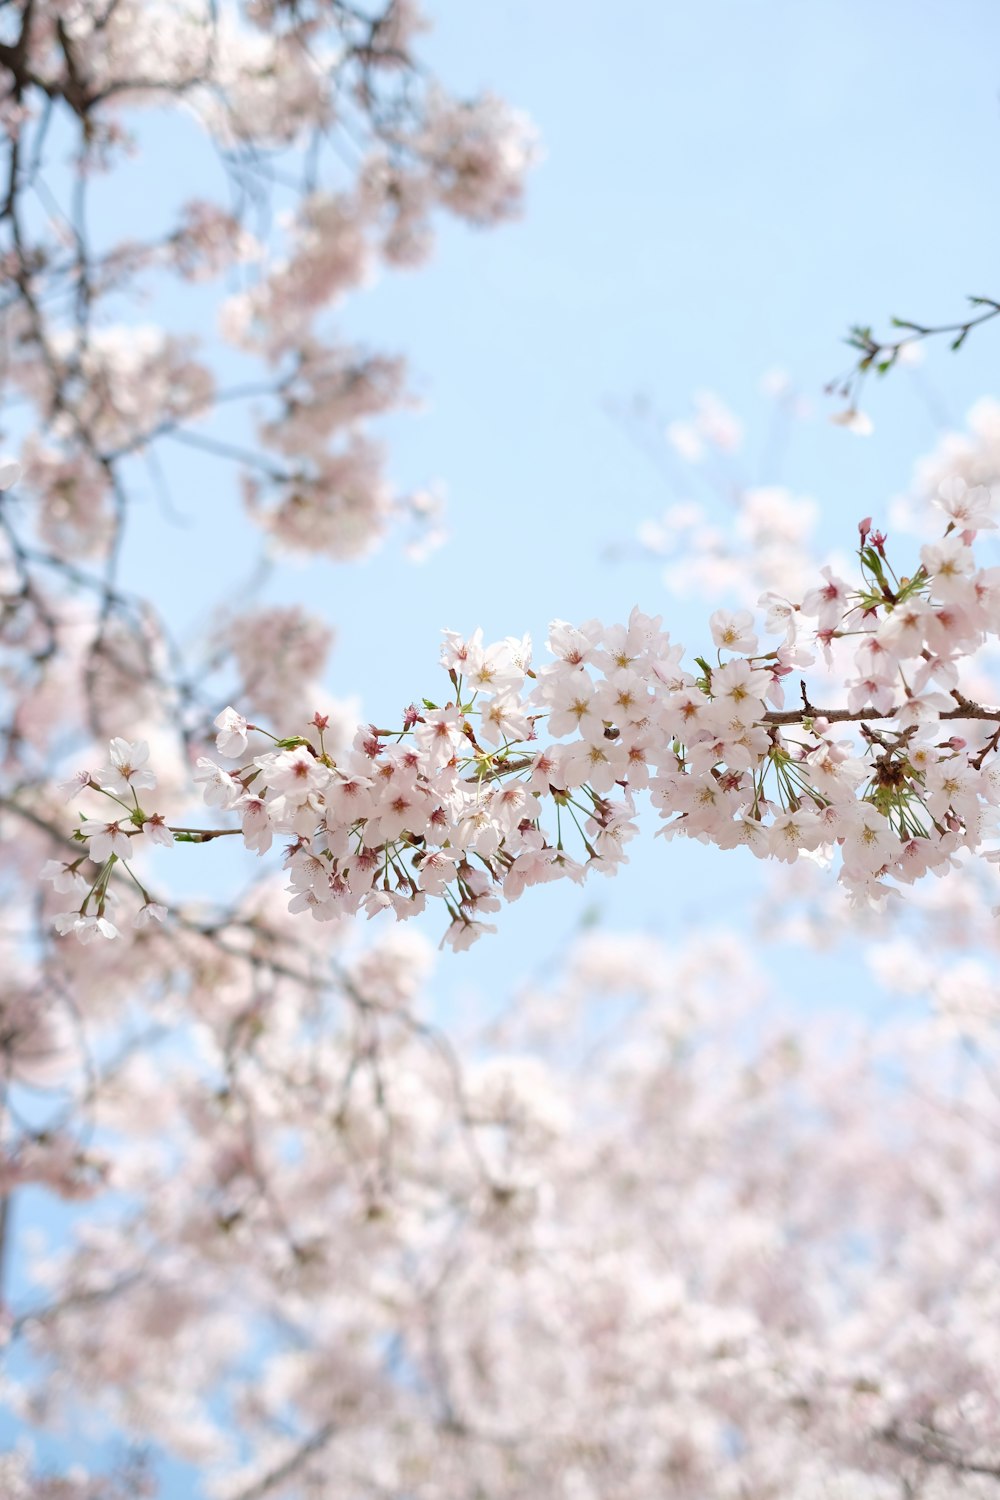 white cherry blossom under clear blue sky during daytime